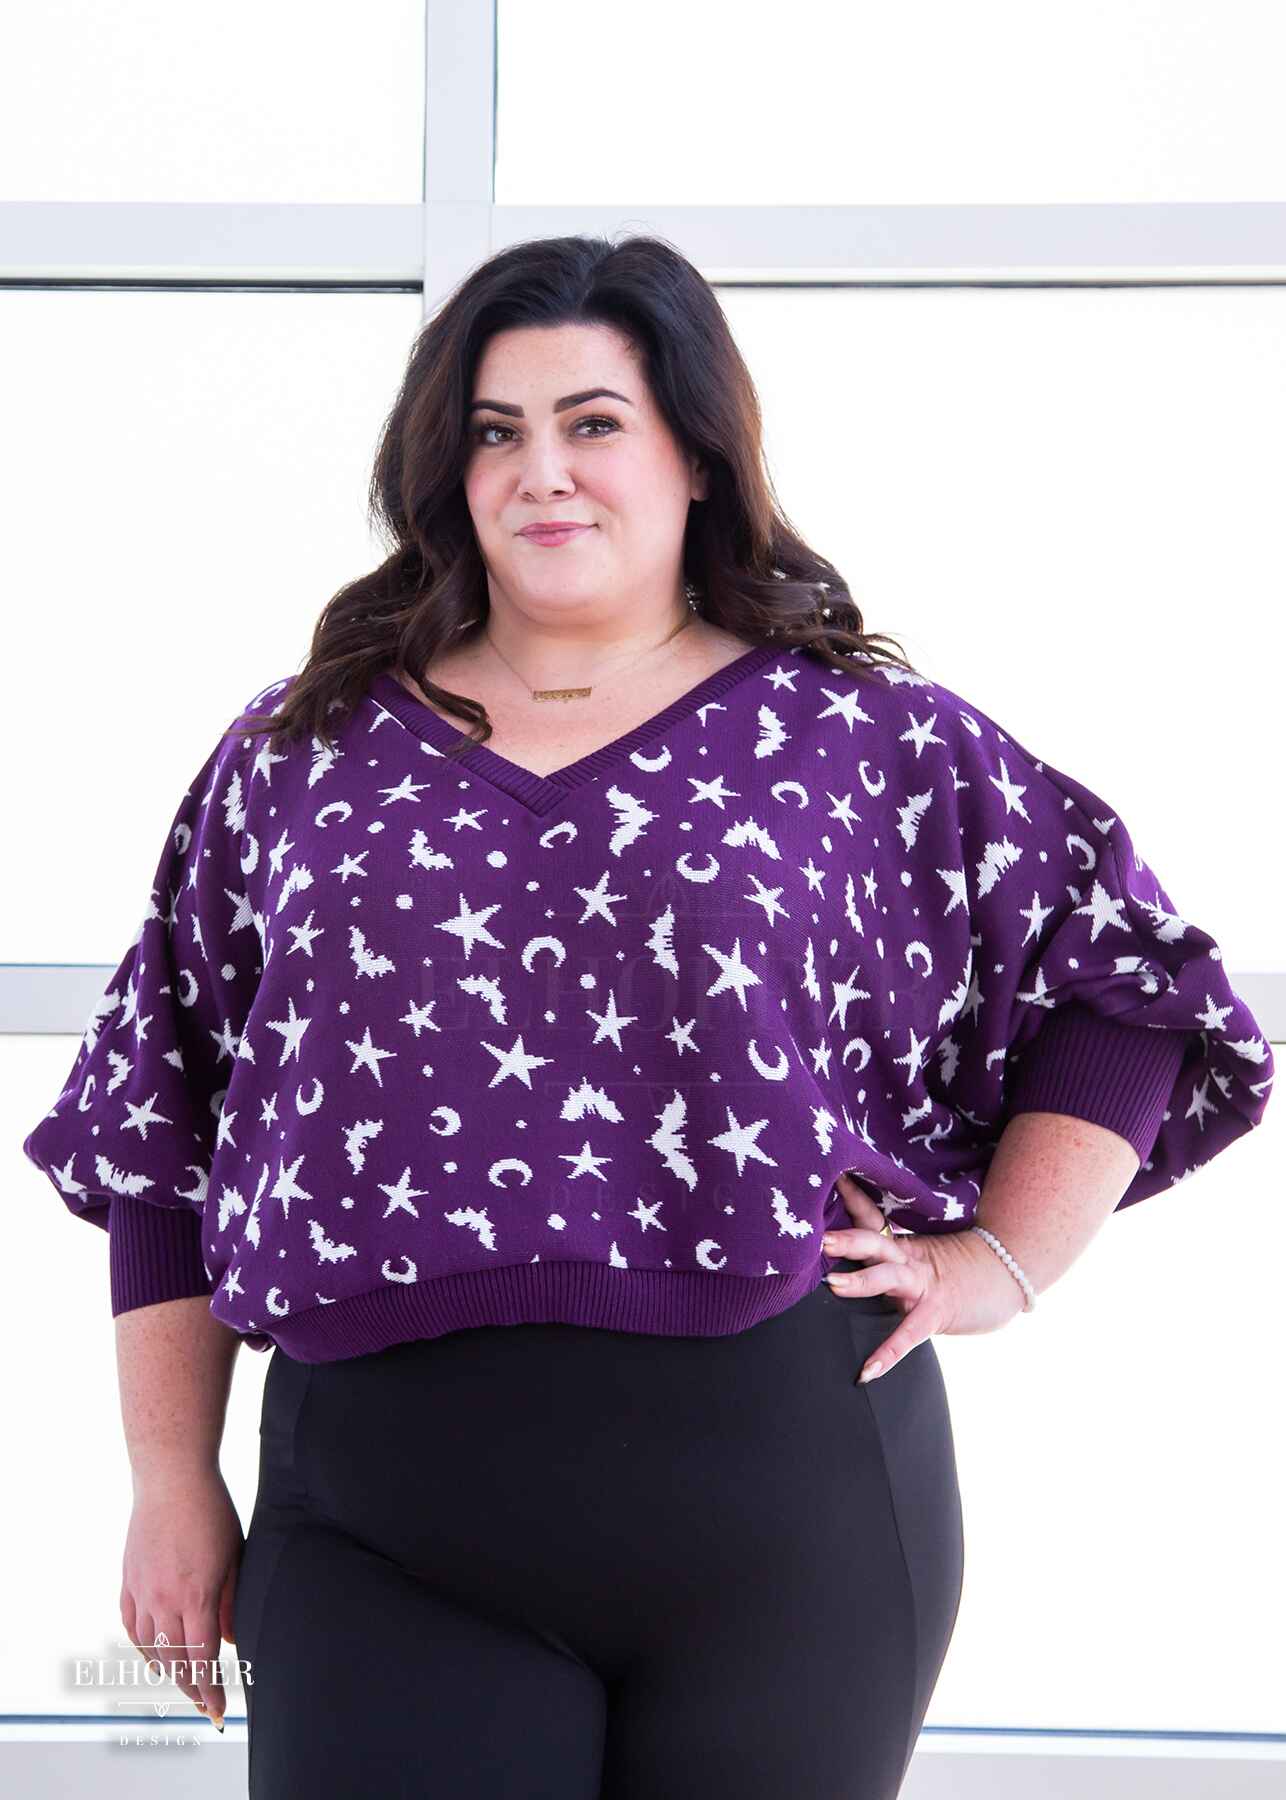 Stacy, a light skinned XL model with shoulder length wavy dark brown hair, is wearing an oversized v neck cropped sweater with batwing sleeves that gather at the wrist.  The main body of the sweater is purple with a white bat, star, moon, and dot pattern repeated throughout.